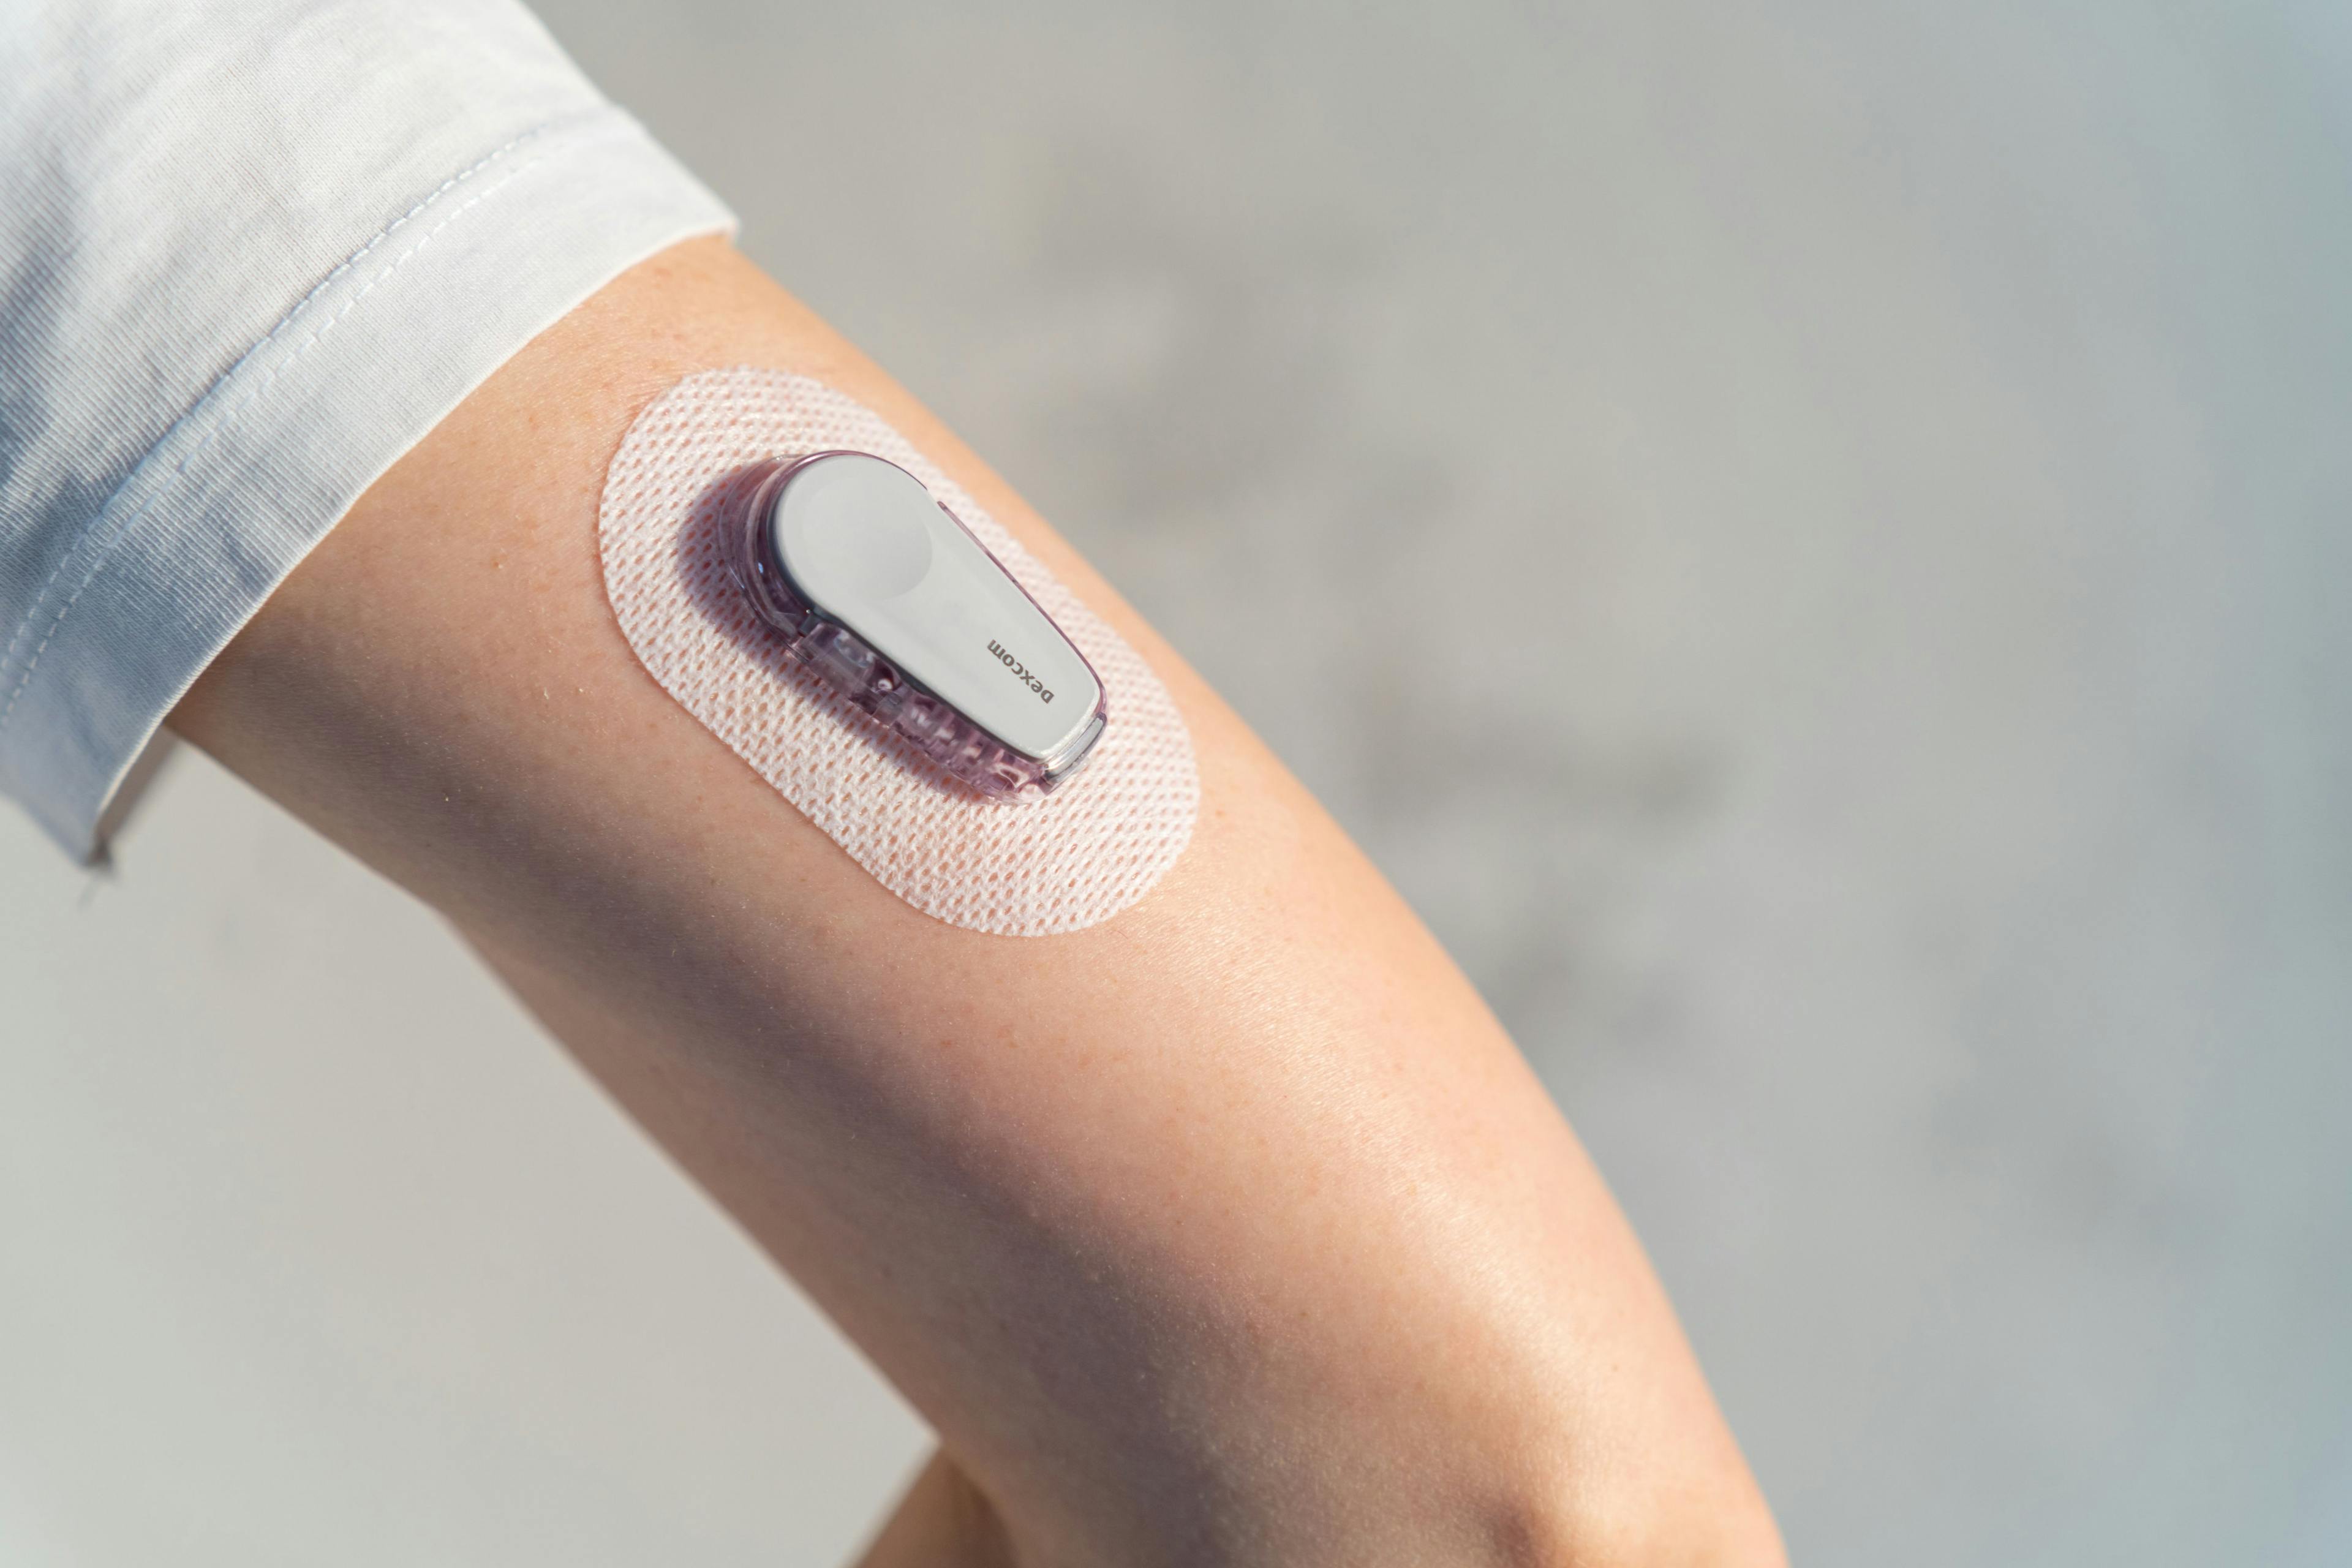 Initiation of Continuous Glucose Monitoring Reduced Hospitalizations for Diabetes, CKD 